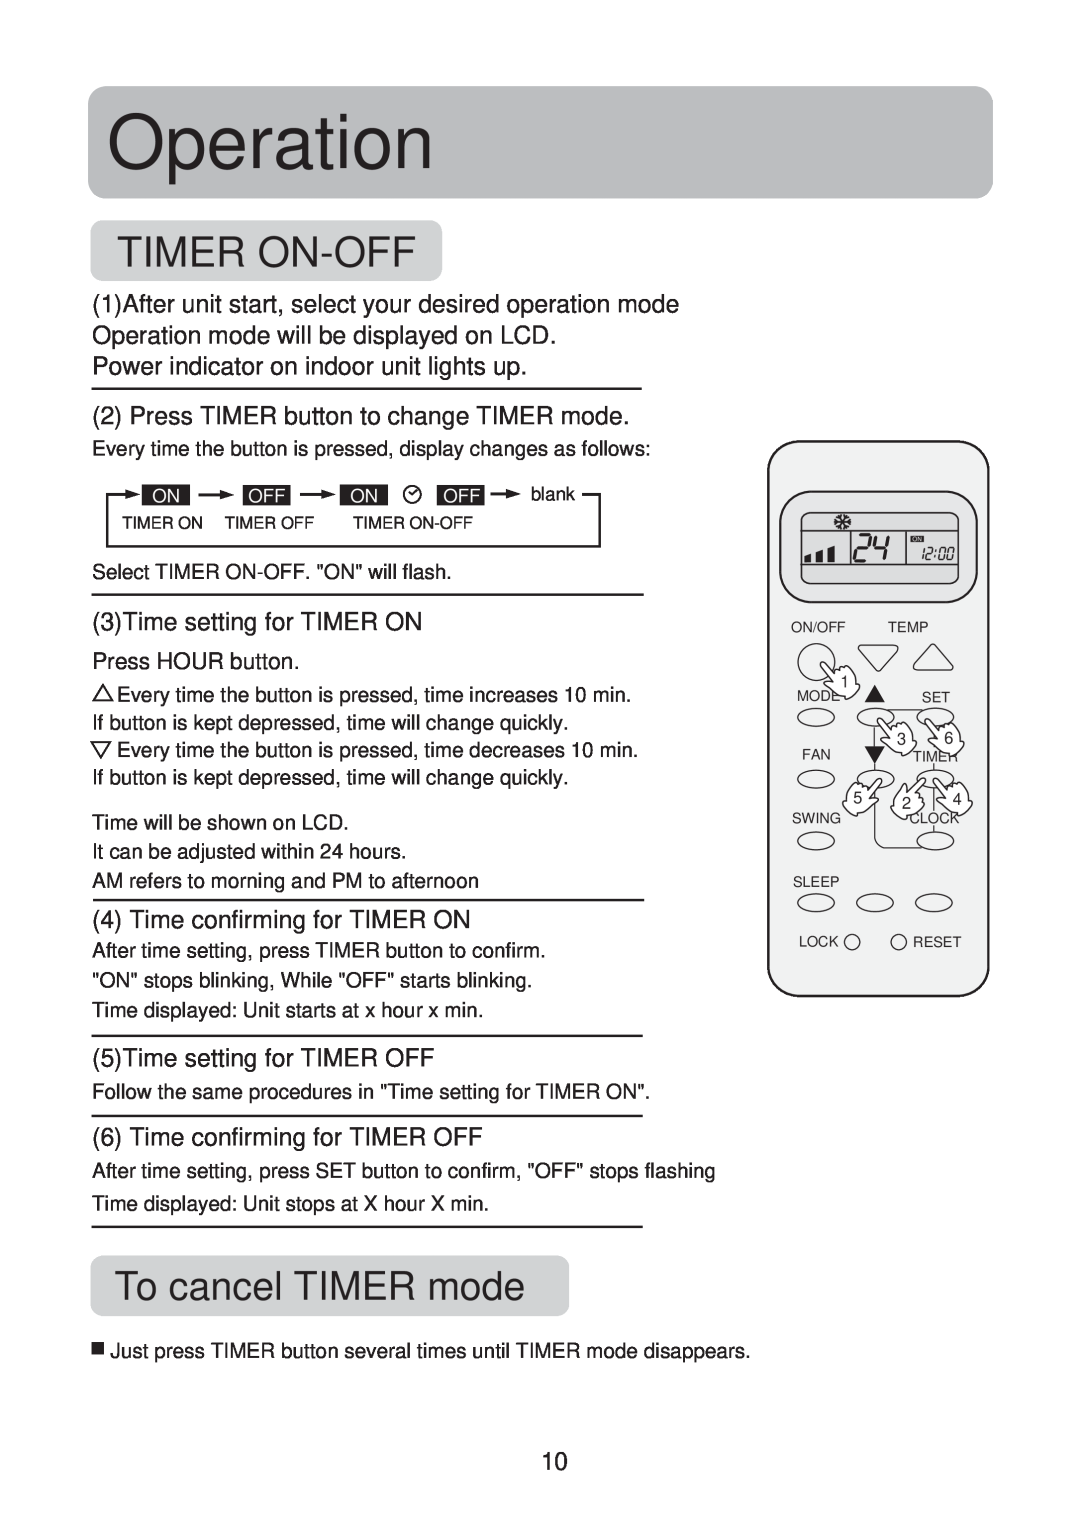 Haier HSU-09LE03, HSU-12LE03 Timeron--Off, To cancel TIMER mode, Operation, Power indicator on indoor unit lights up 